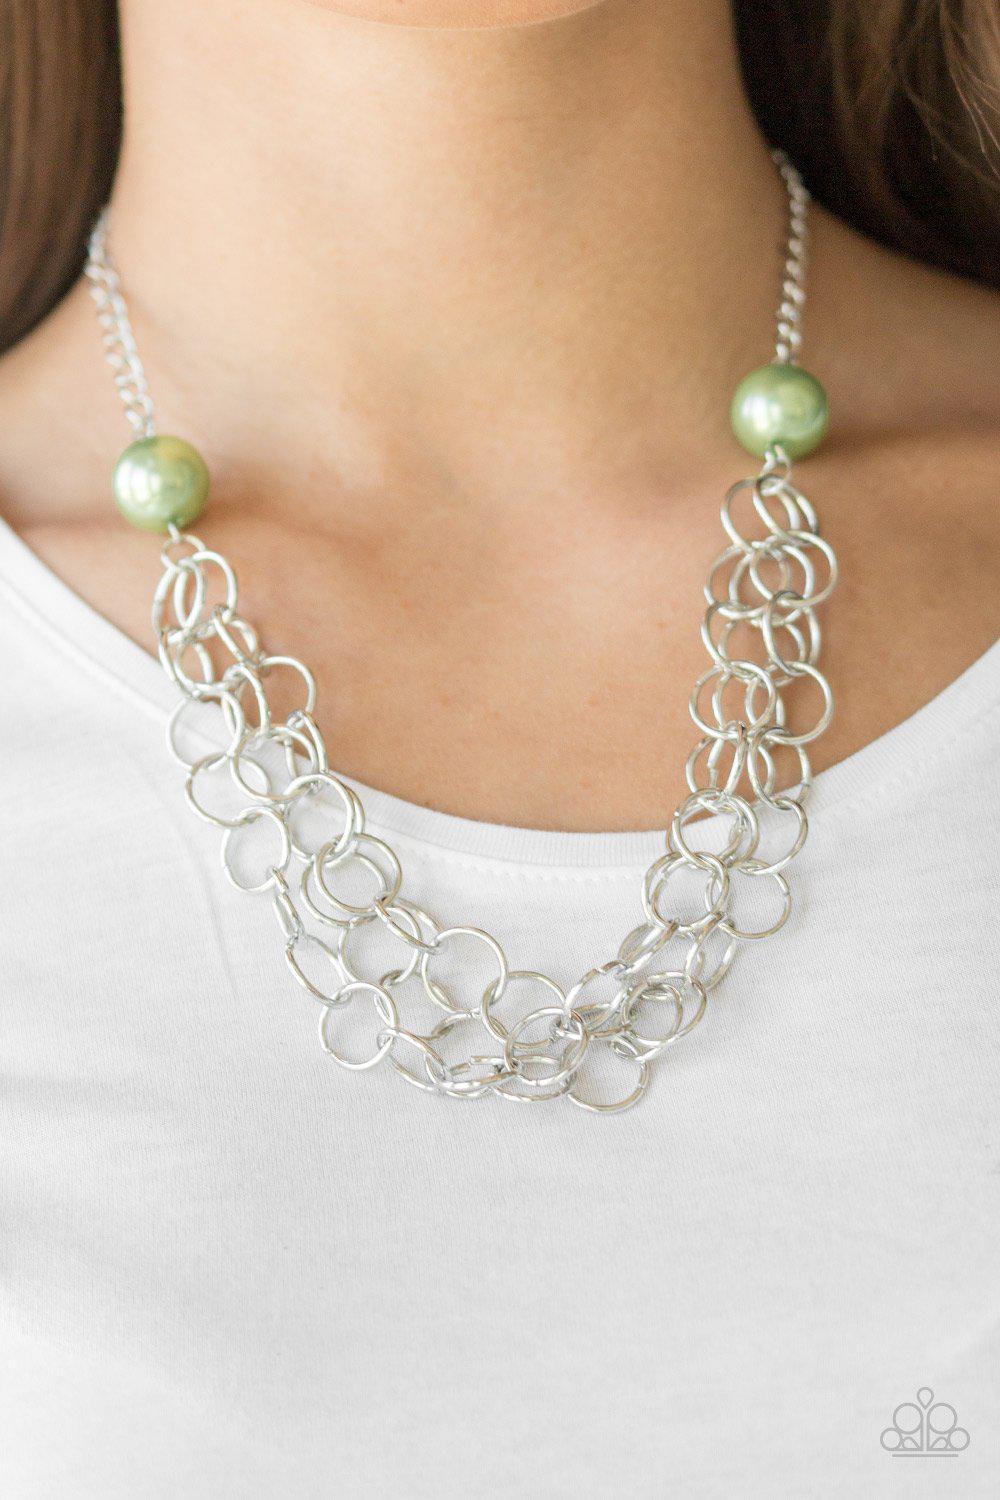 Daring Diva Green and Silver Necklace - Paparazzi Accessories - model -CarasShop.com - $5 Jewelry by Cara Jewels